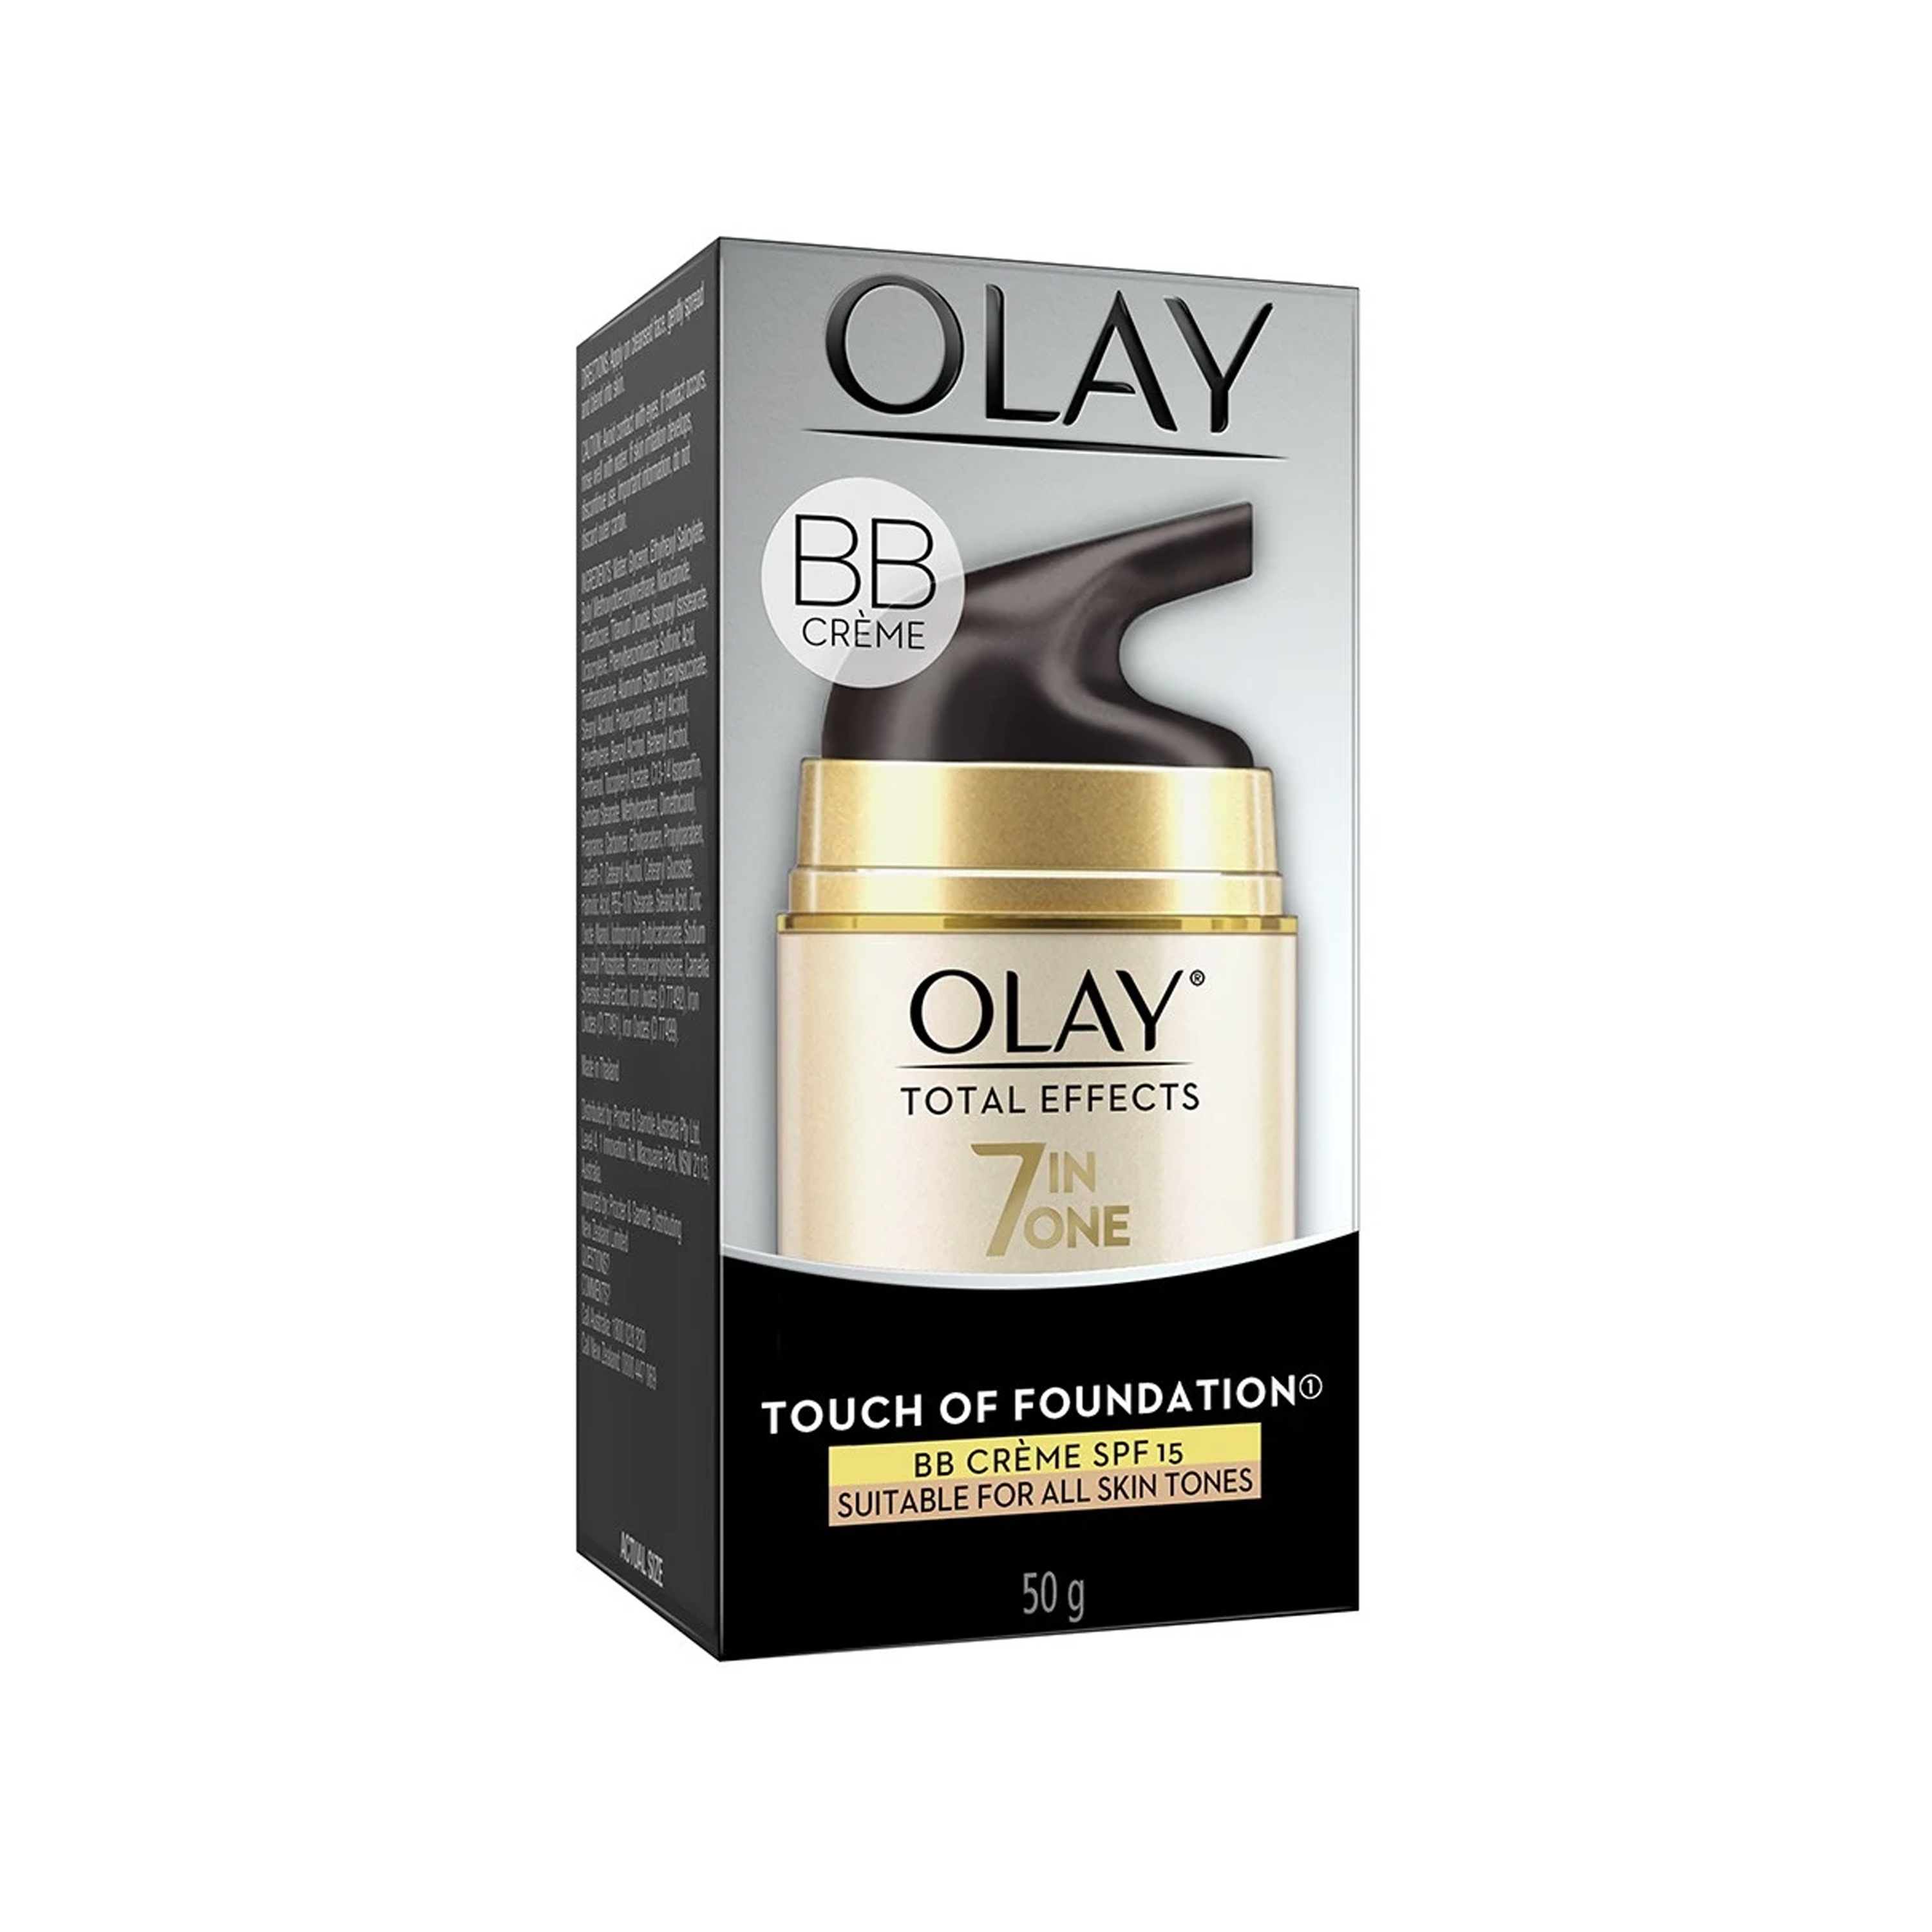 Olay Total Effects BB Crème SPF 15